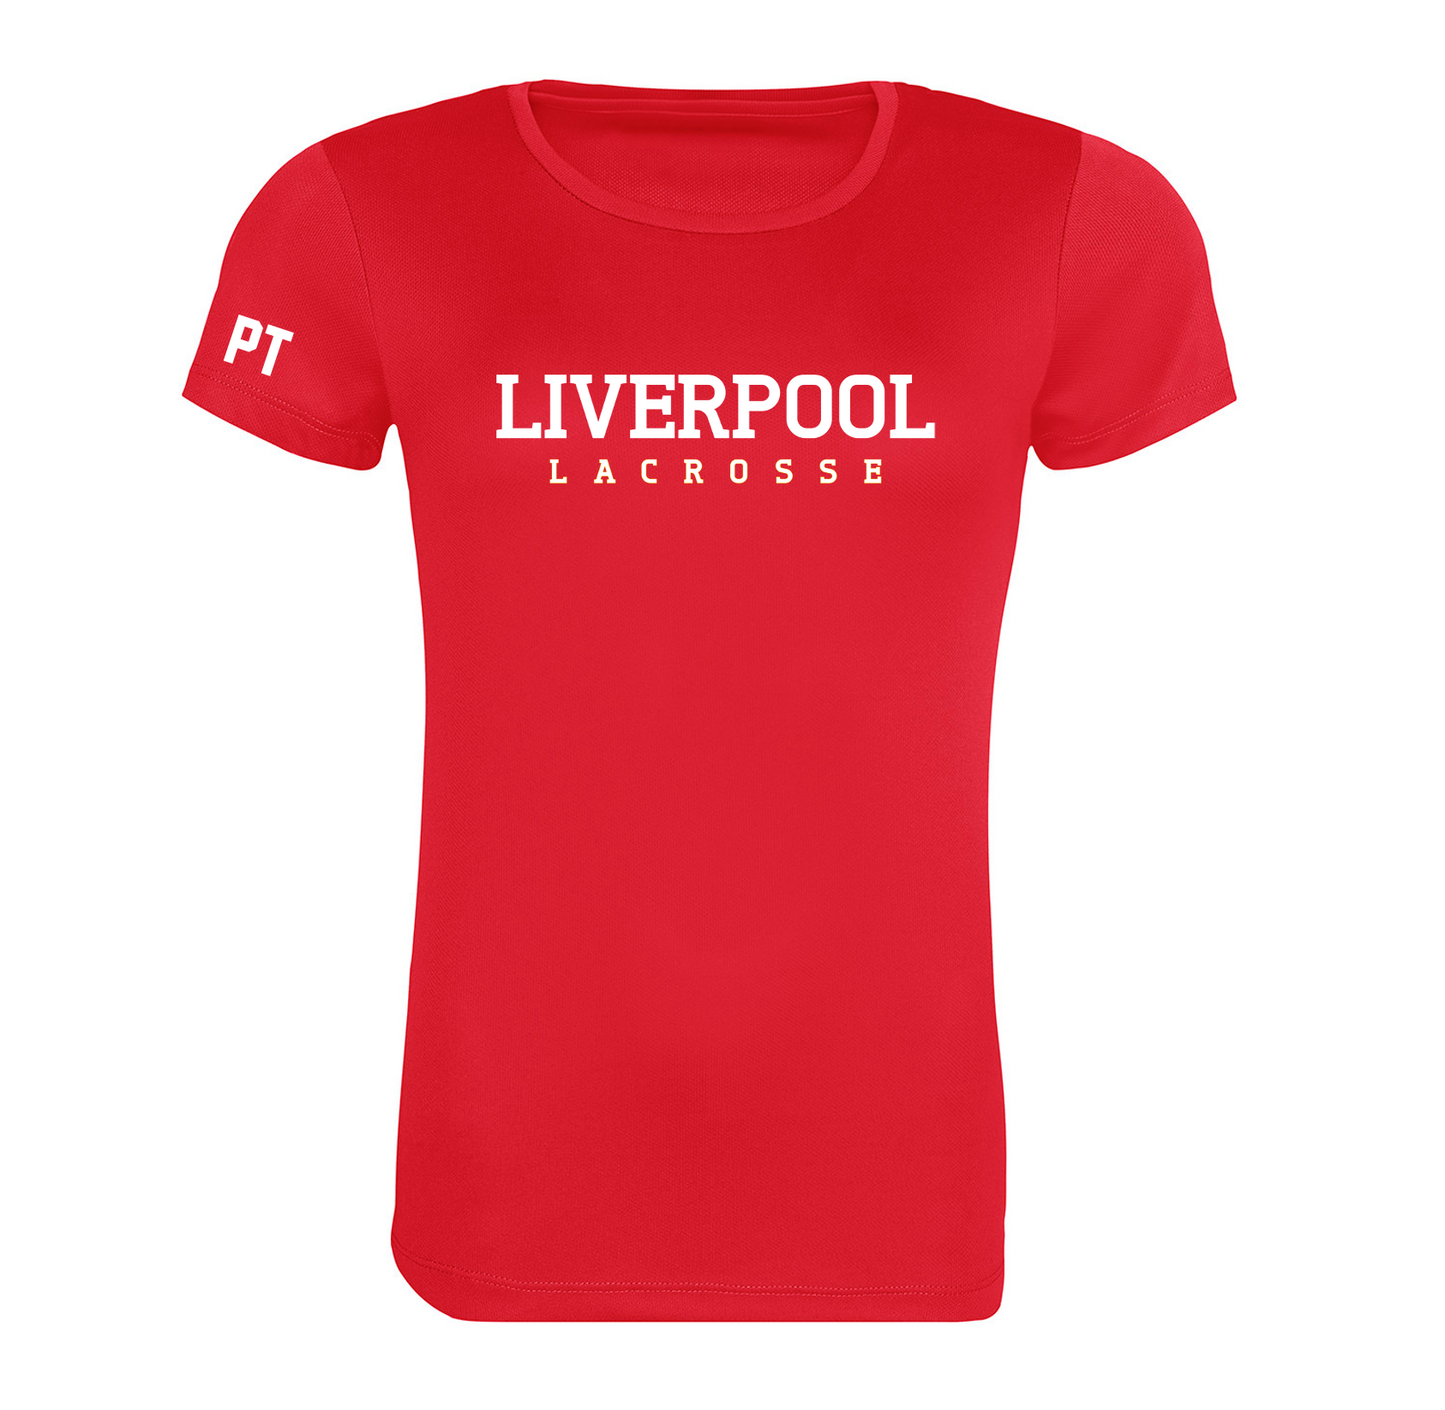 Liverpool Lacrosse Recycled Tech Tee